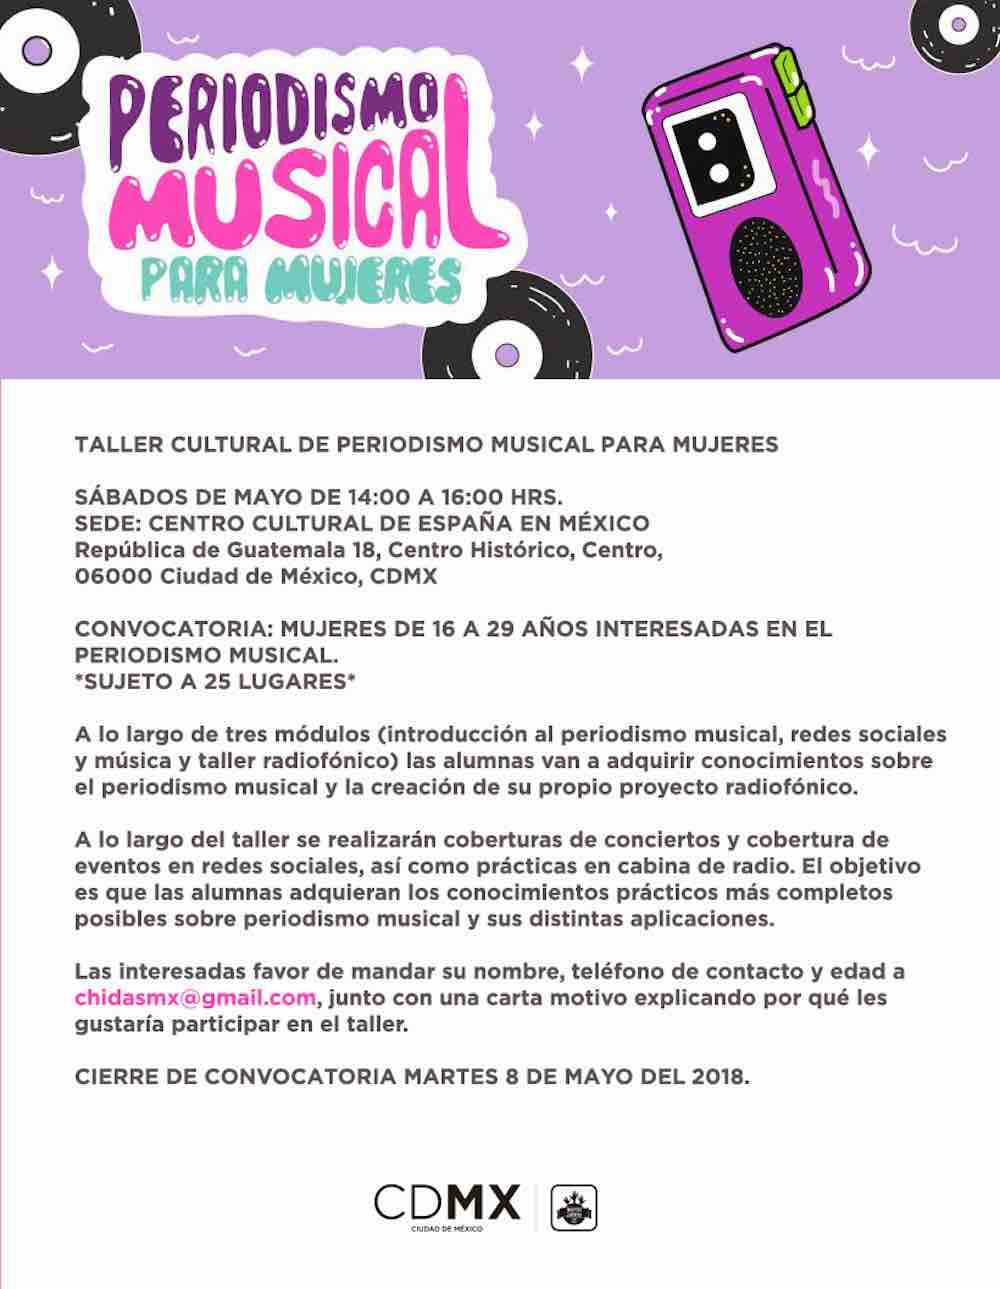 Taller de periodismo musical para mujeres, by Chidasmx 1